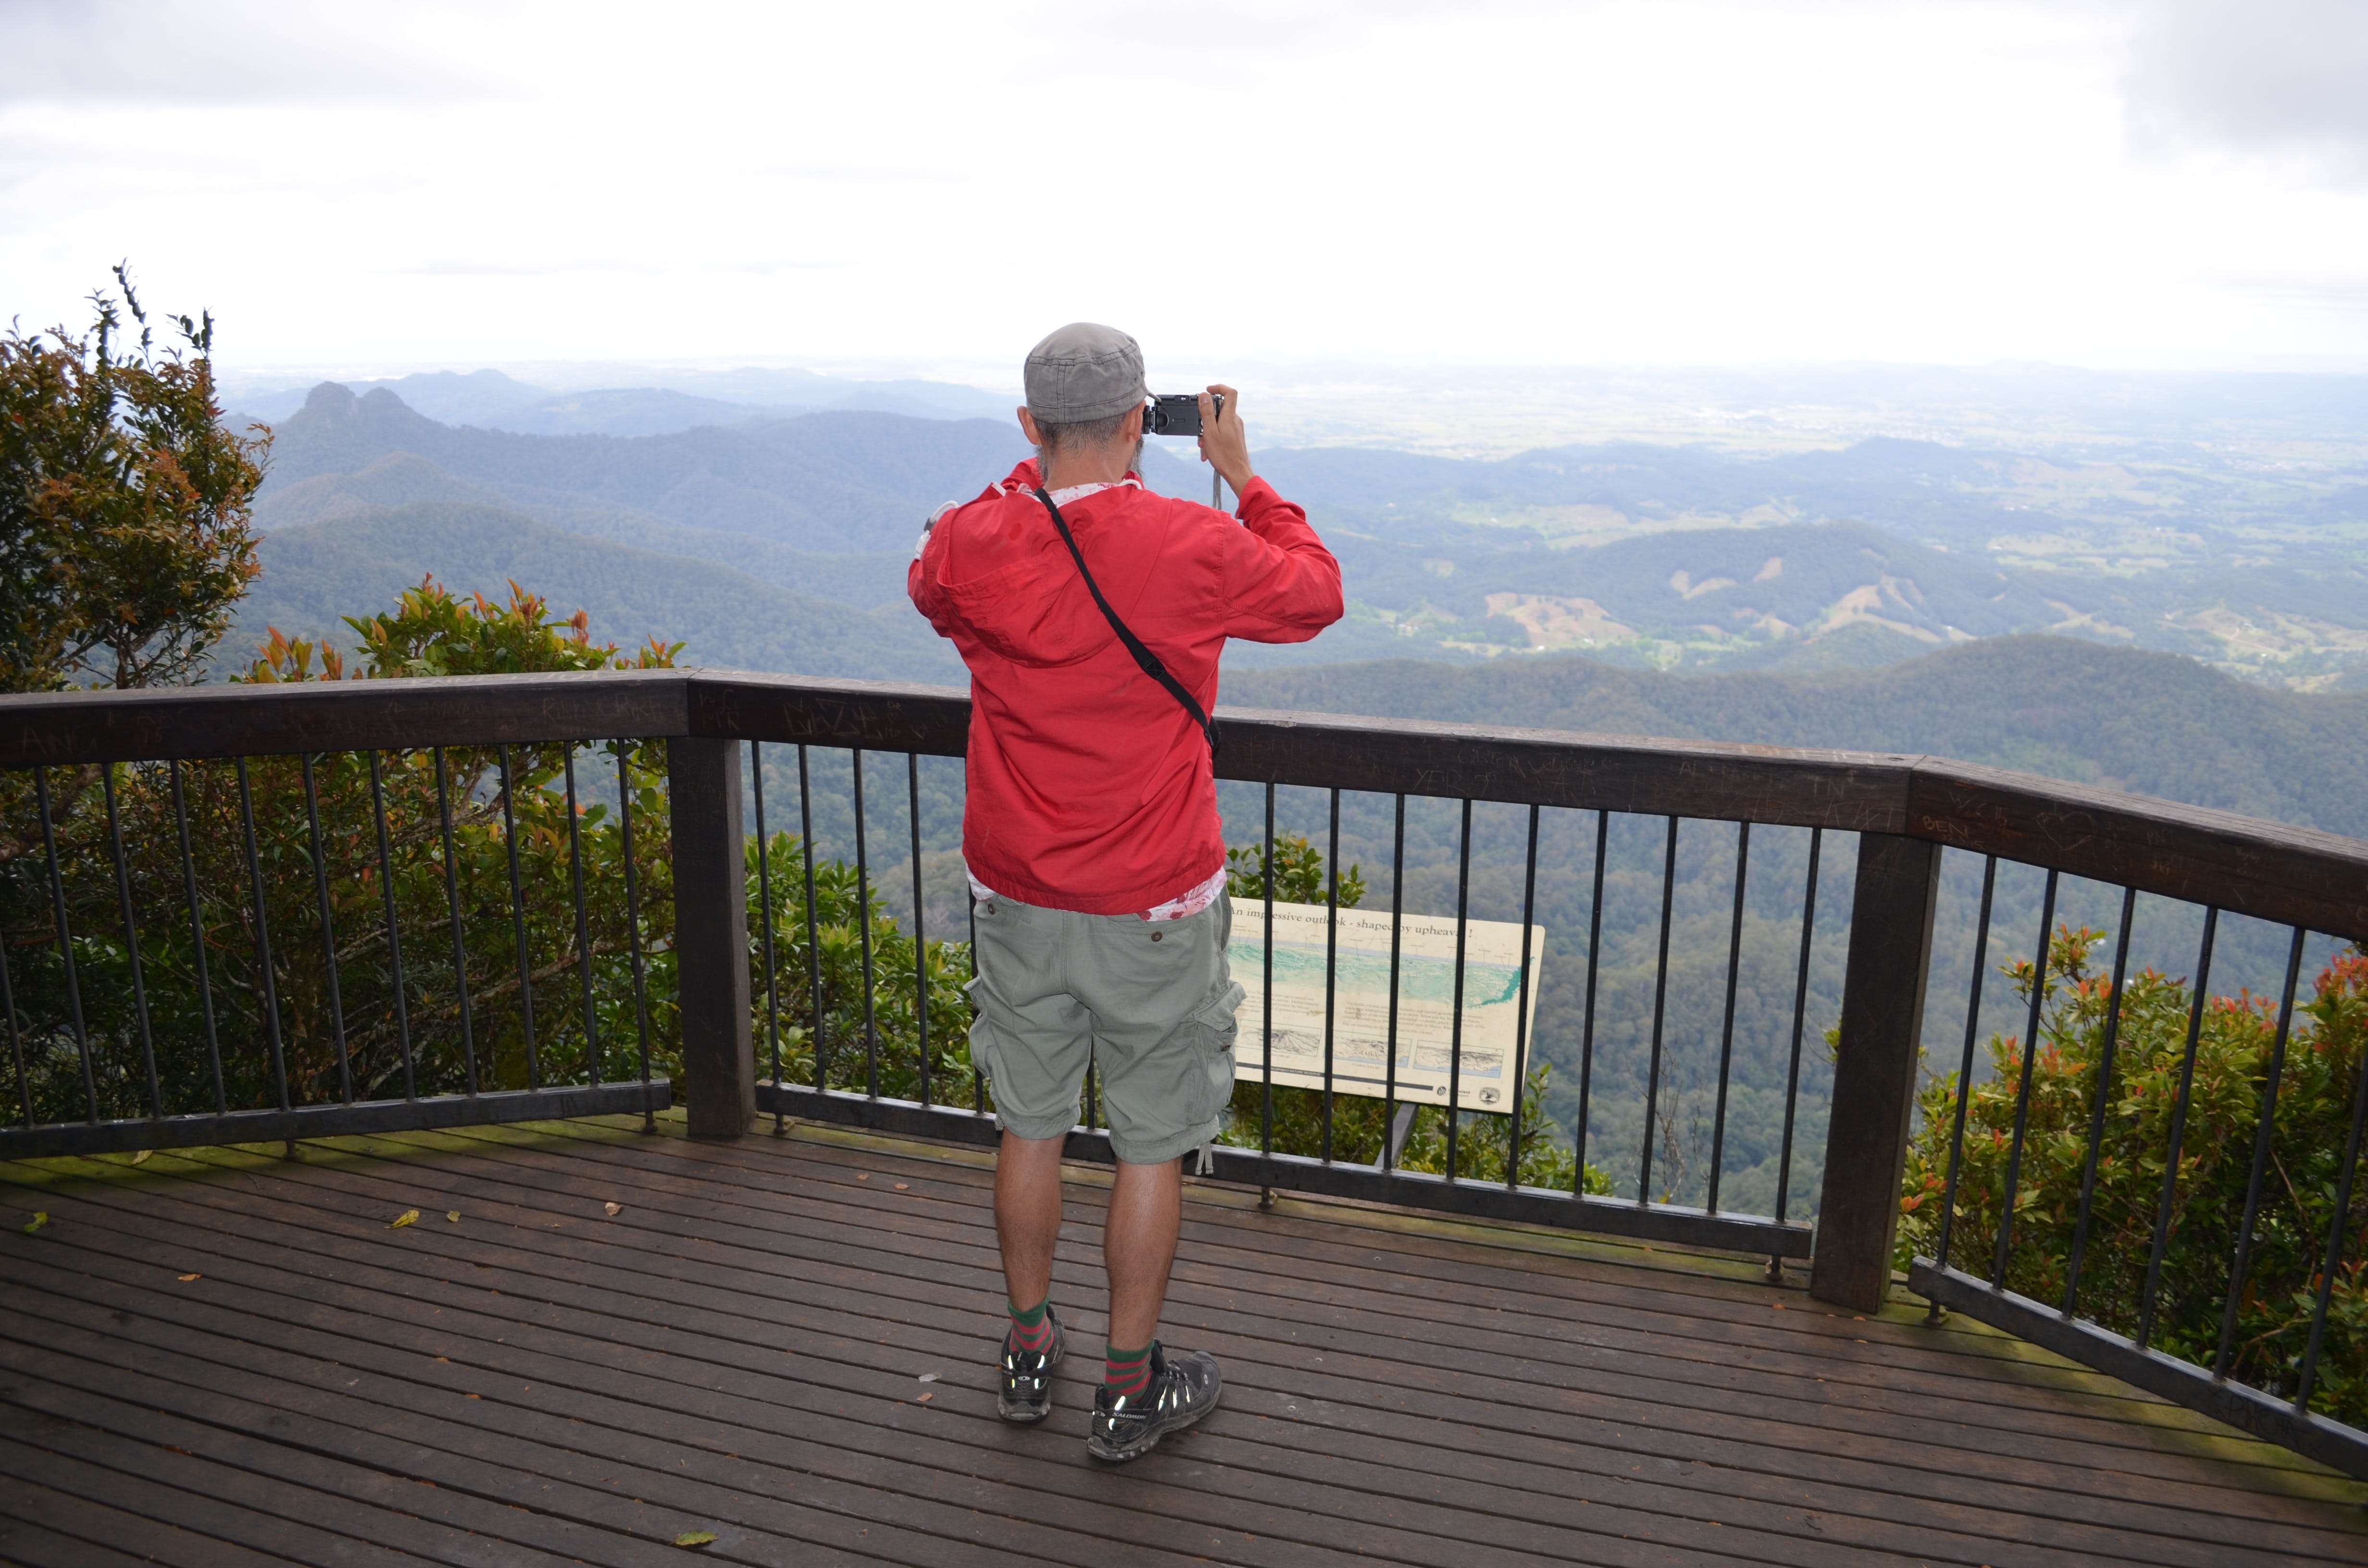 Best of All lookout track Springbrook National Park - Find Attractions